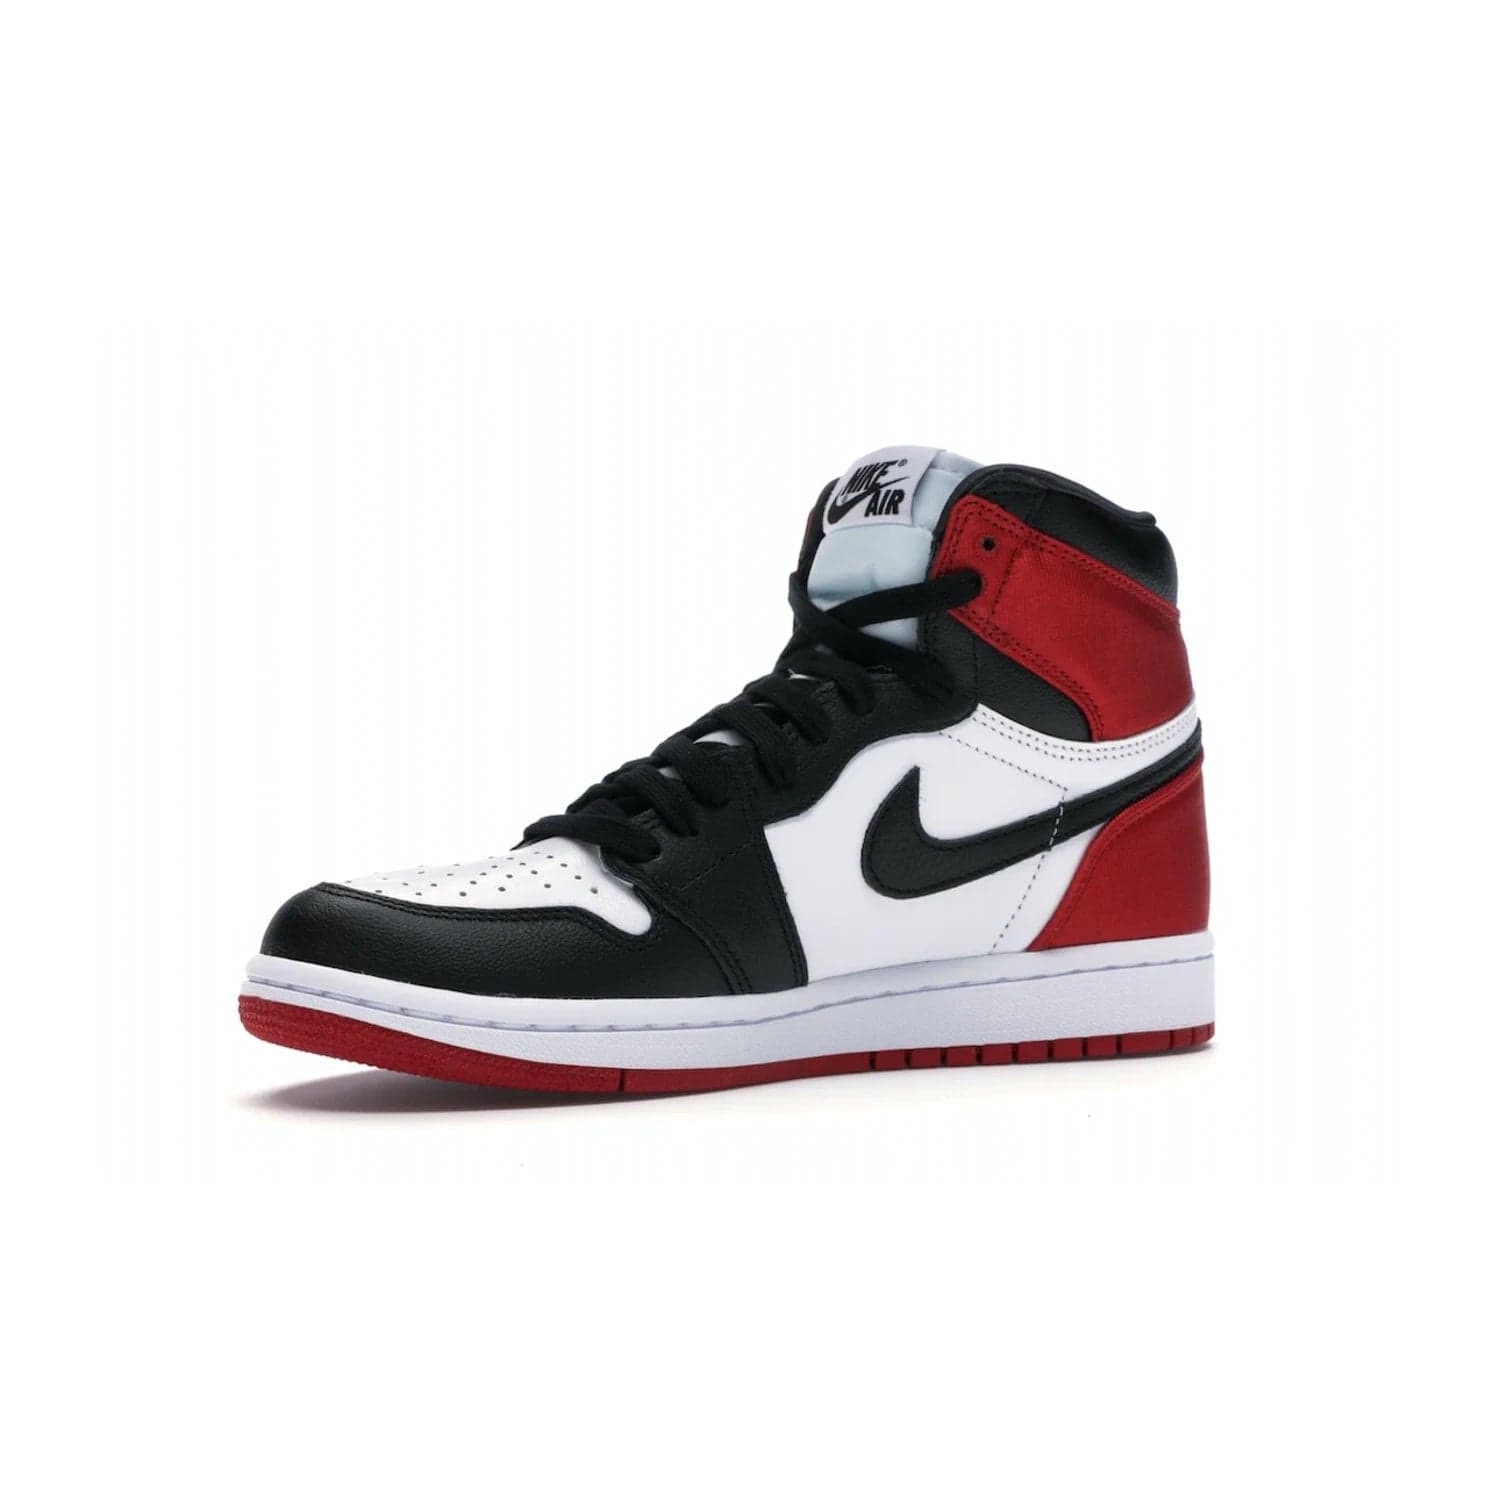 Jordan 1 Retro High Satin Black Toe (Women's) - Image 16 - Only at www.BallersClubKickz.com - Luxurious take on the timeless Air Jordan 1. Features a mix of black leather and satin materials with subtle University Red accents. Elevated look with metal Wings logo on the heel. Released in August 2019.